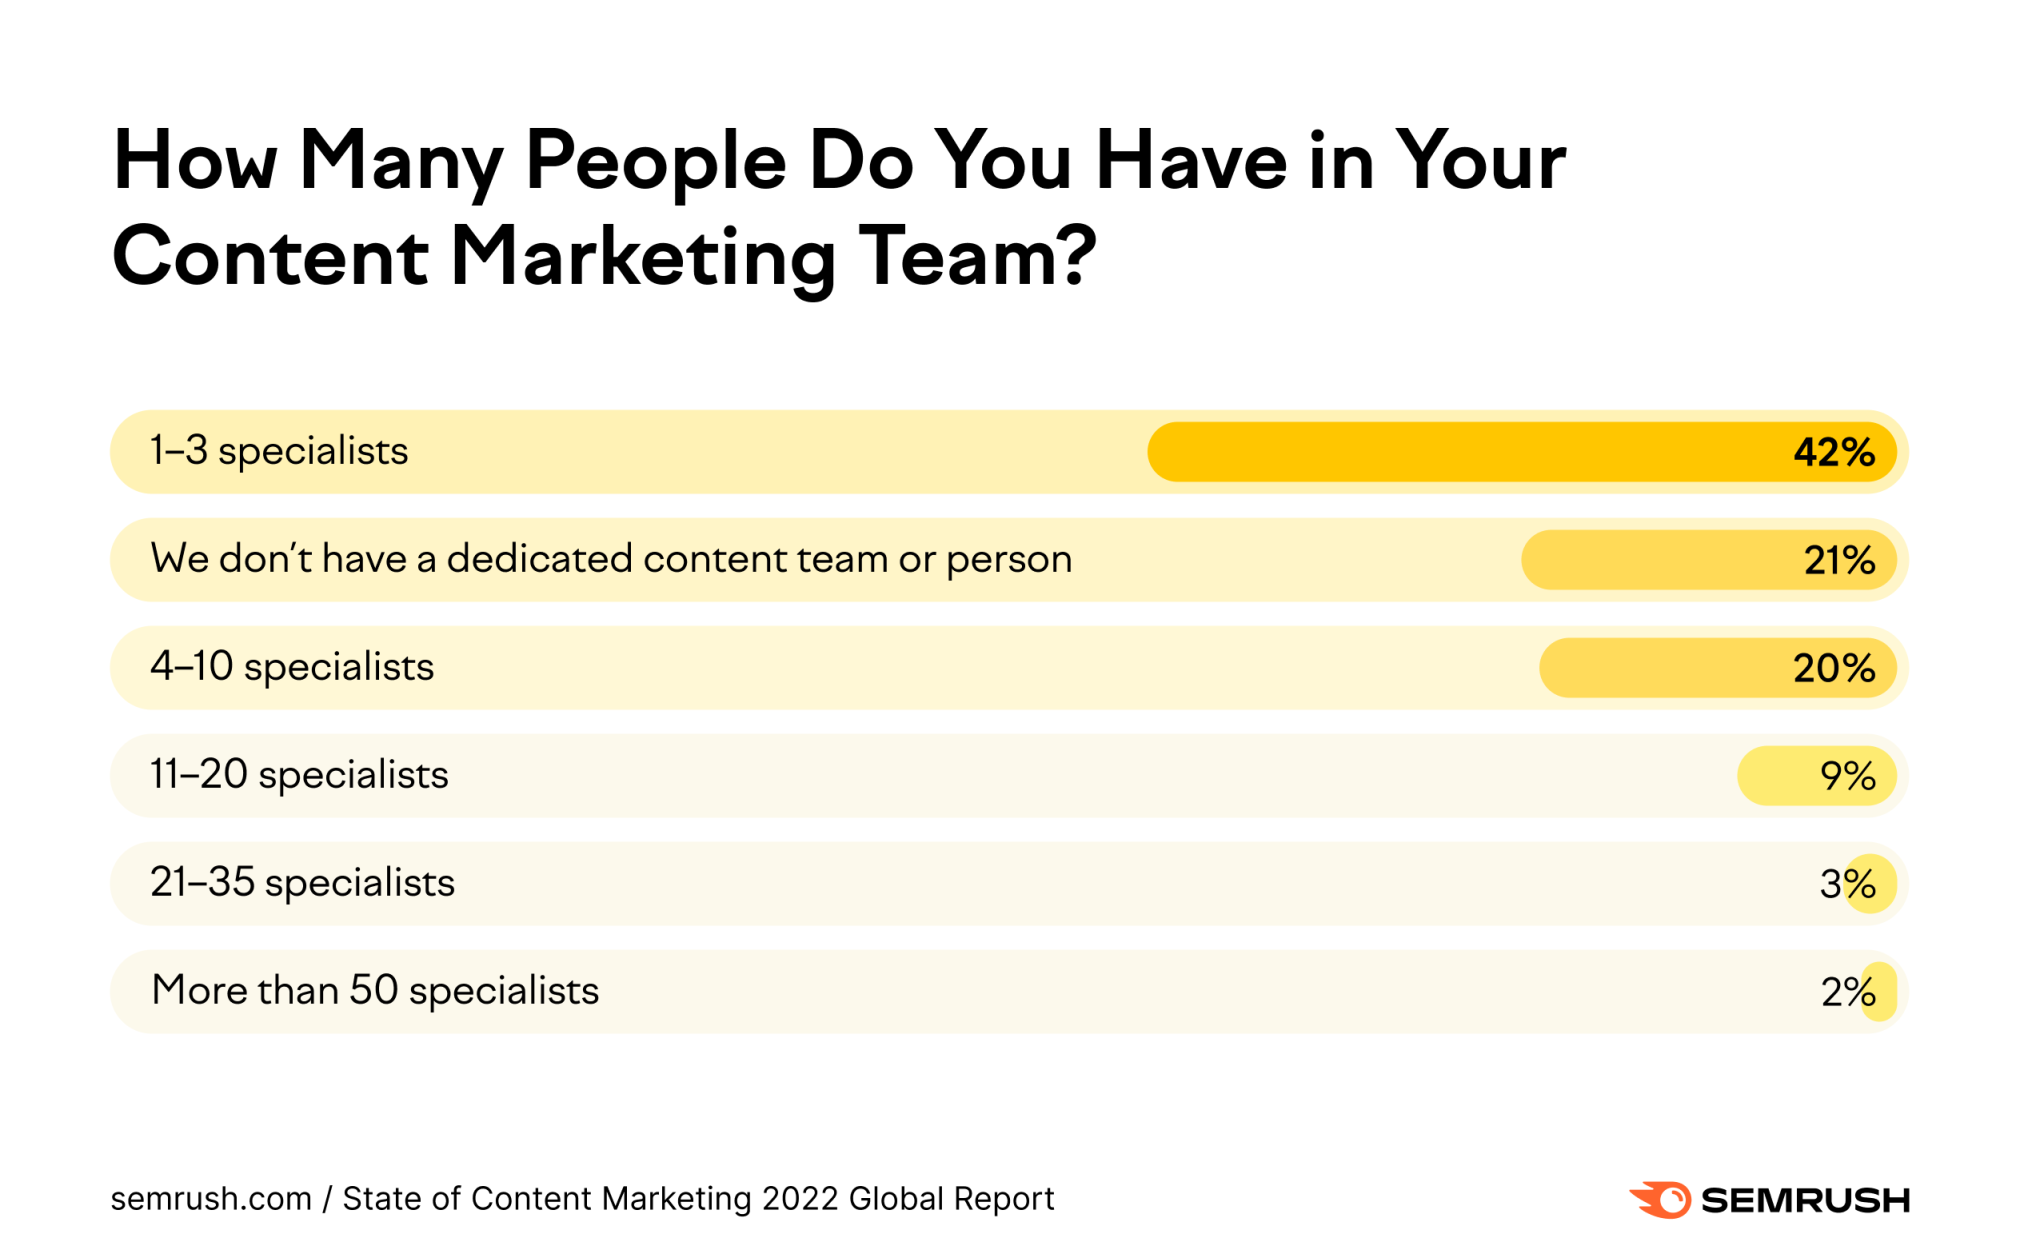 size of the content marketing team